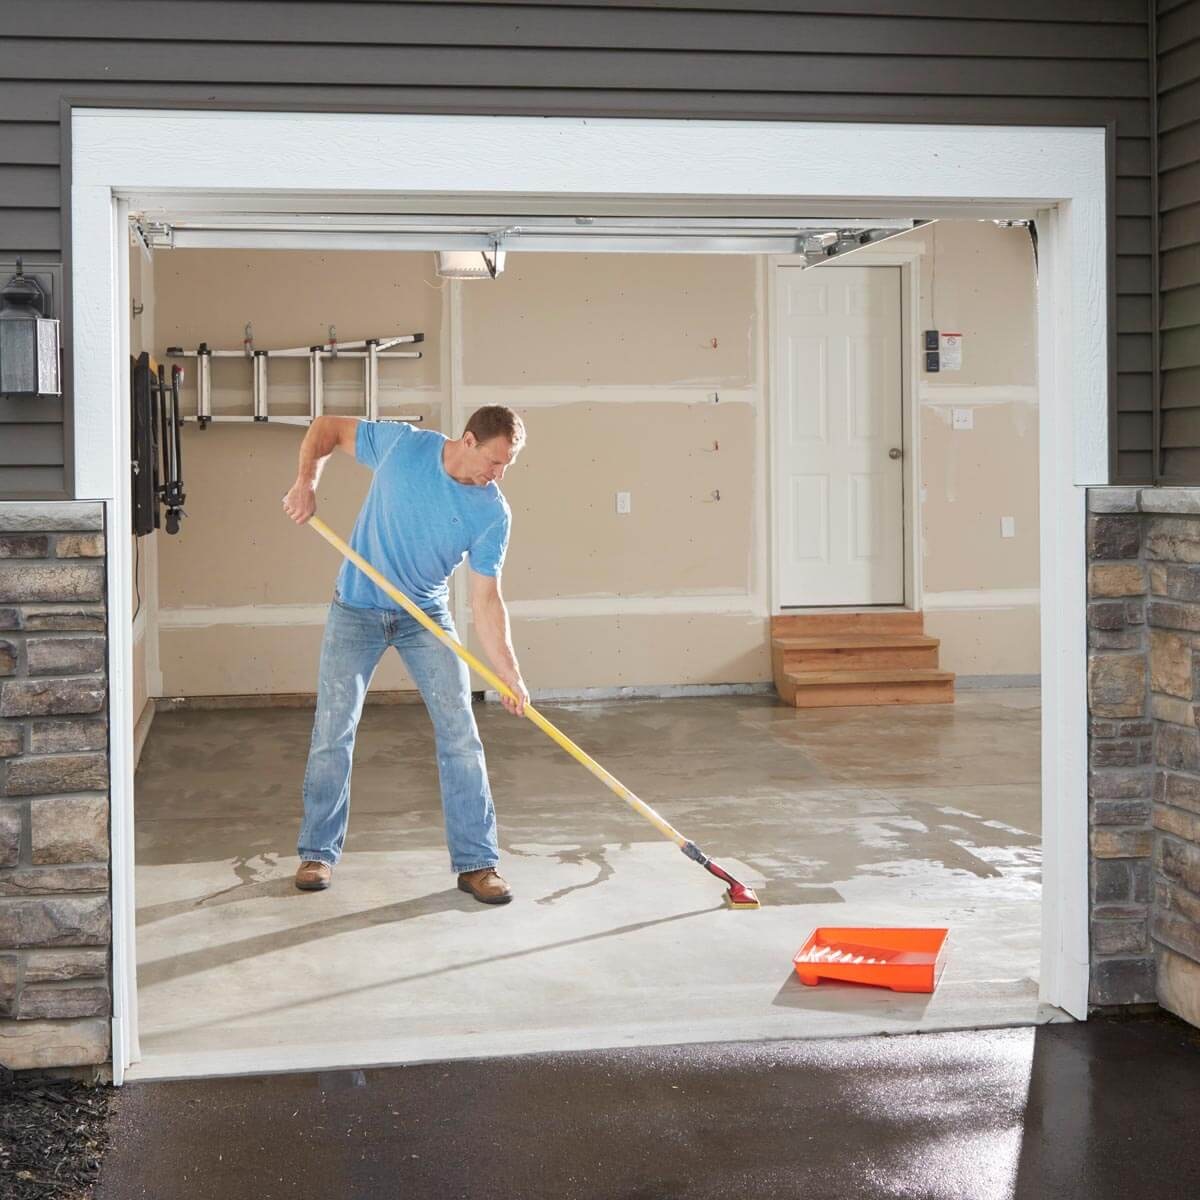 5 Reasons You Need to Resurface Your Garage Floor